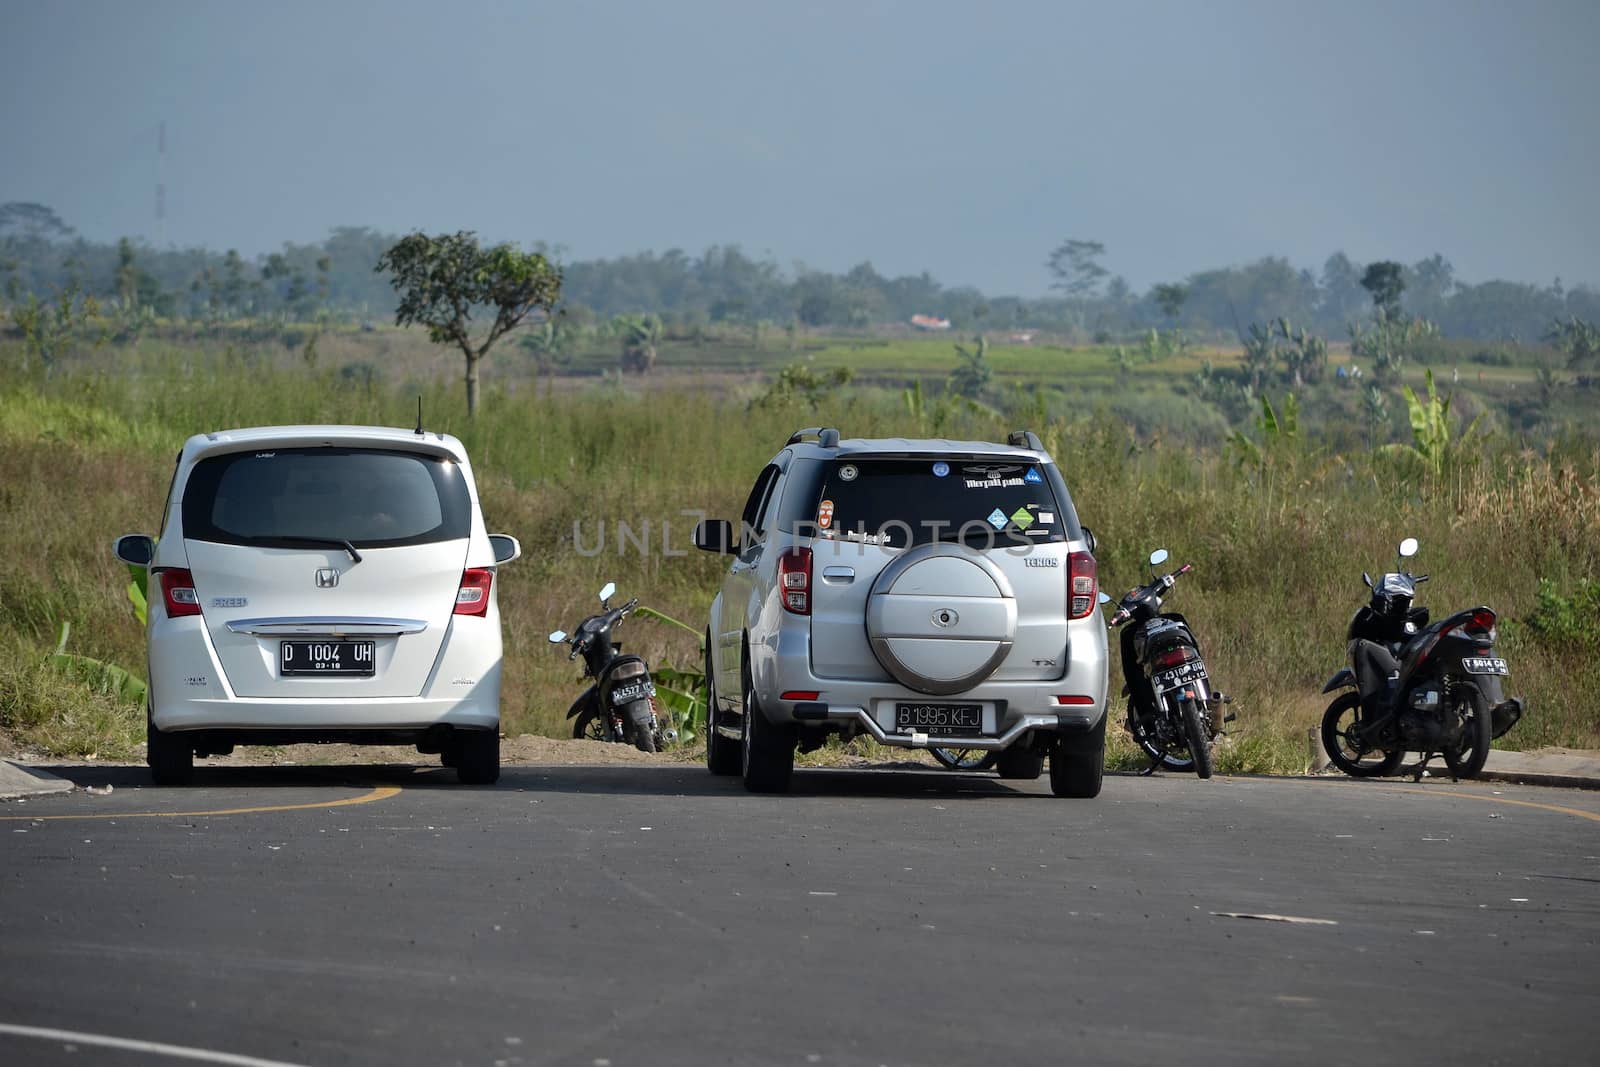 Bandung, Indonesia - August 1, 2014: White colored Honda Freed and silver colored Daihatsu Terios parked beside road.